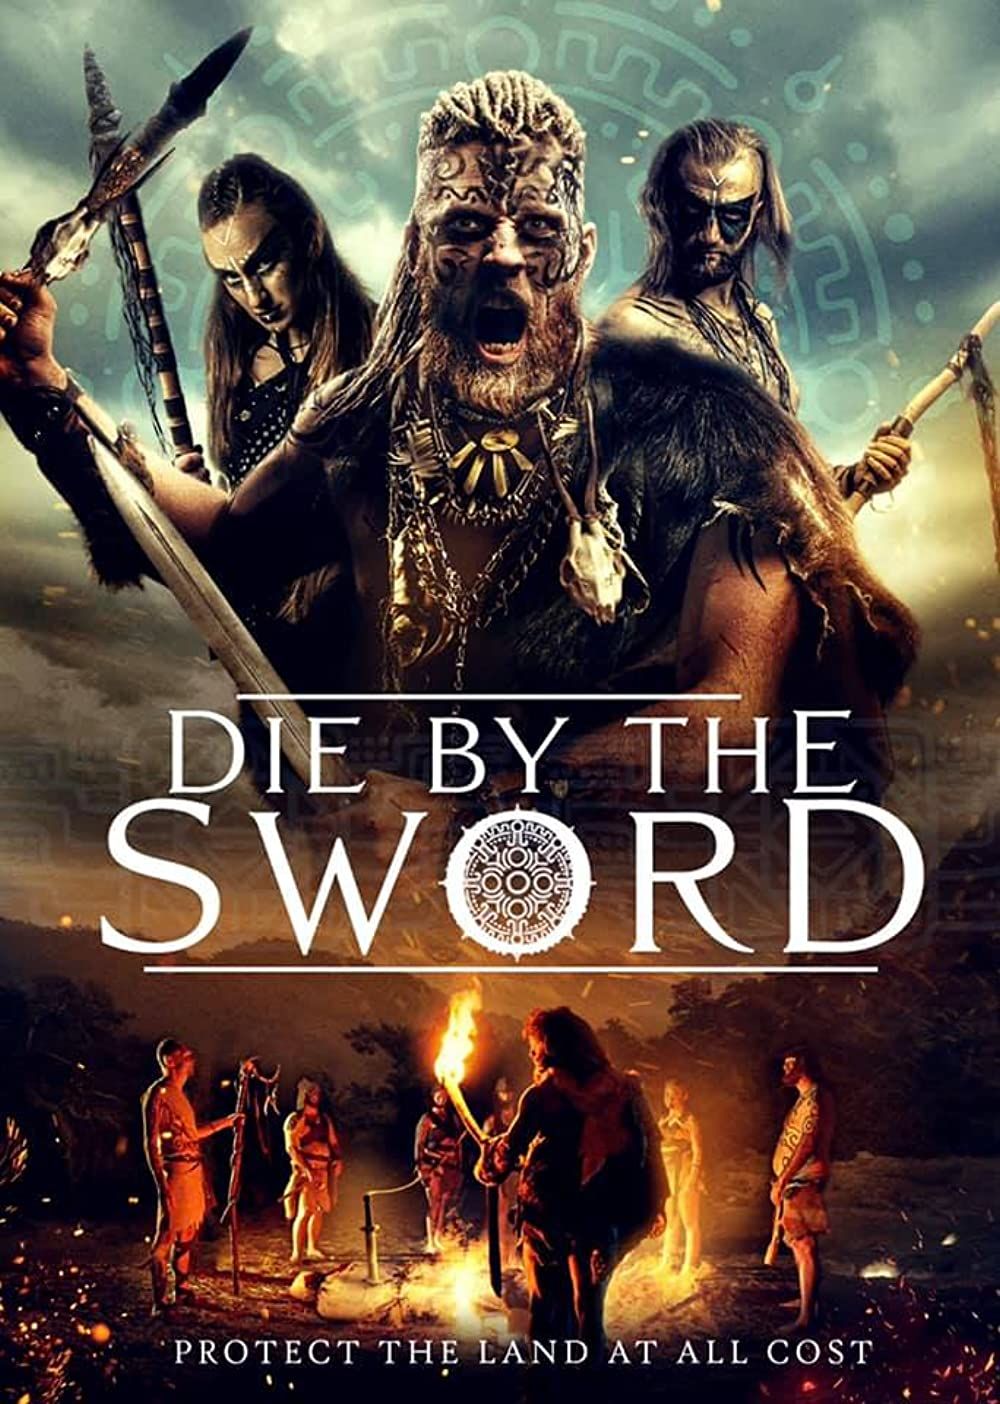 Die by the Sword (2020) Hindi Dubbed HDRip download full movie